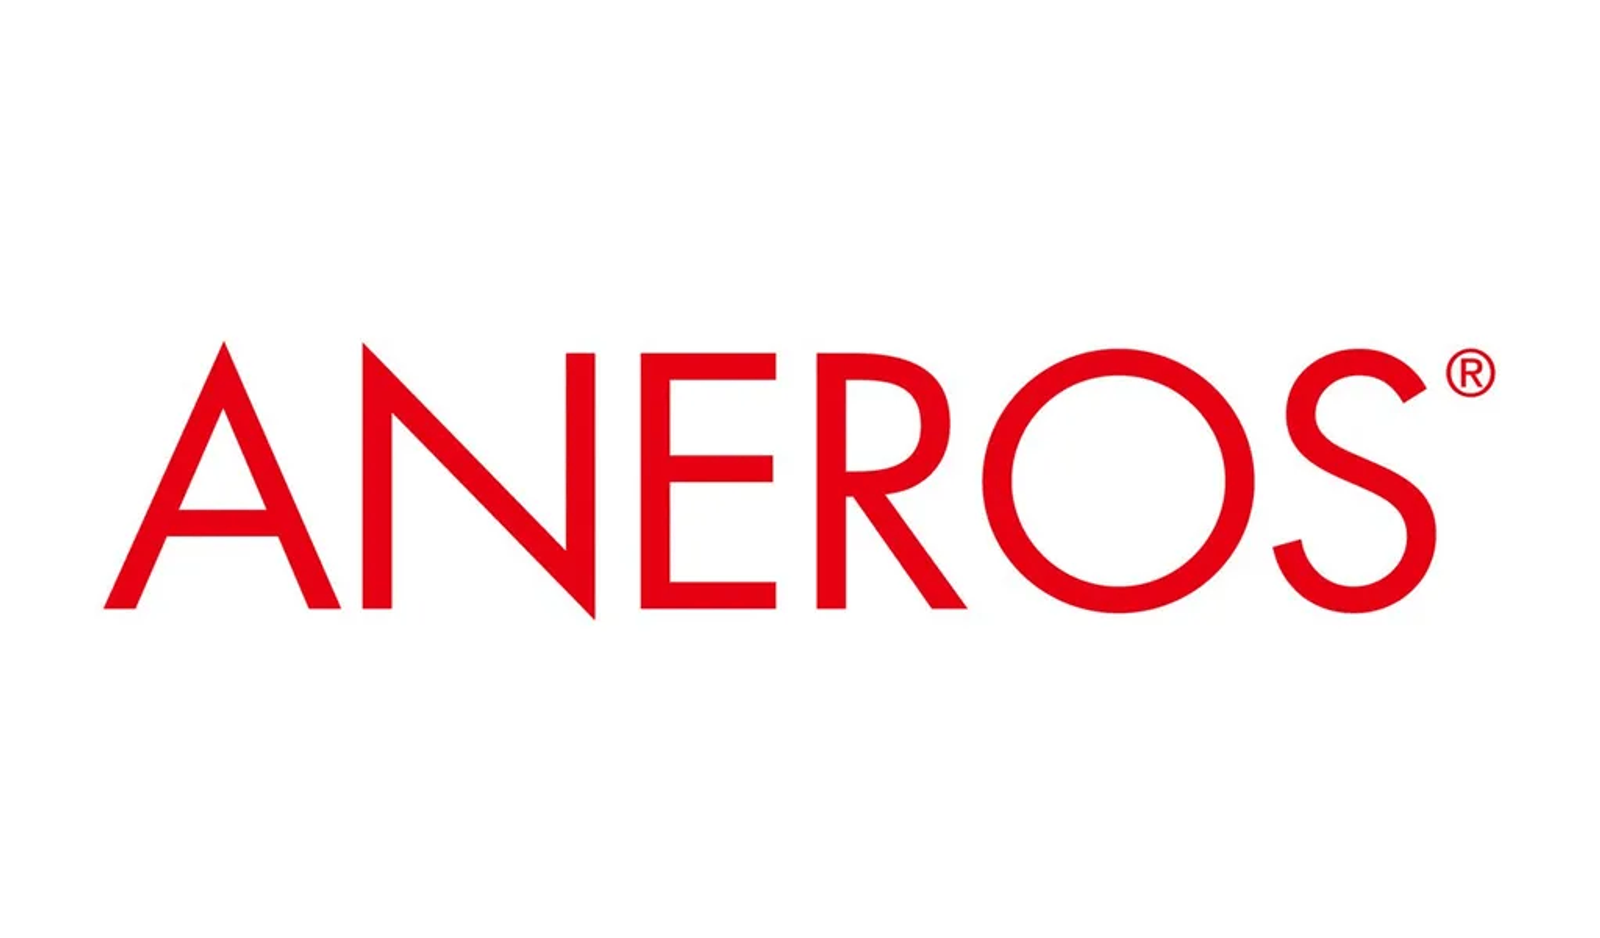 Aneros Wins Outstanding Anal Product at 2023 'O' Awards 